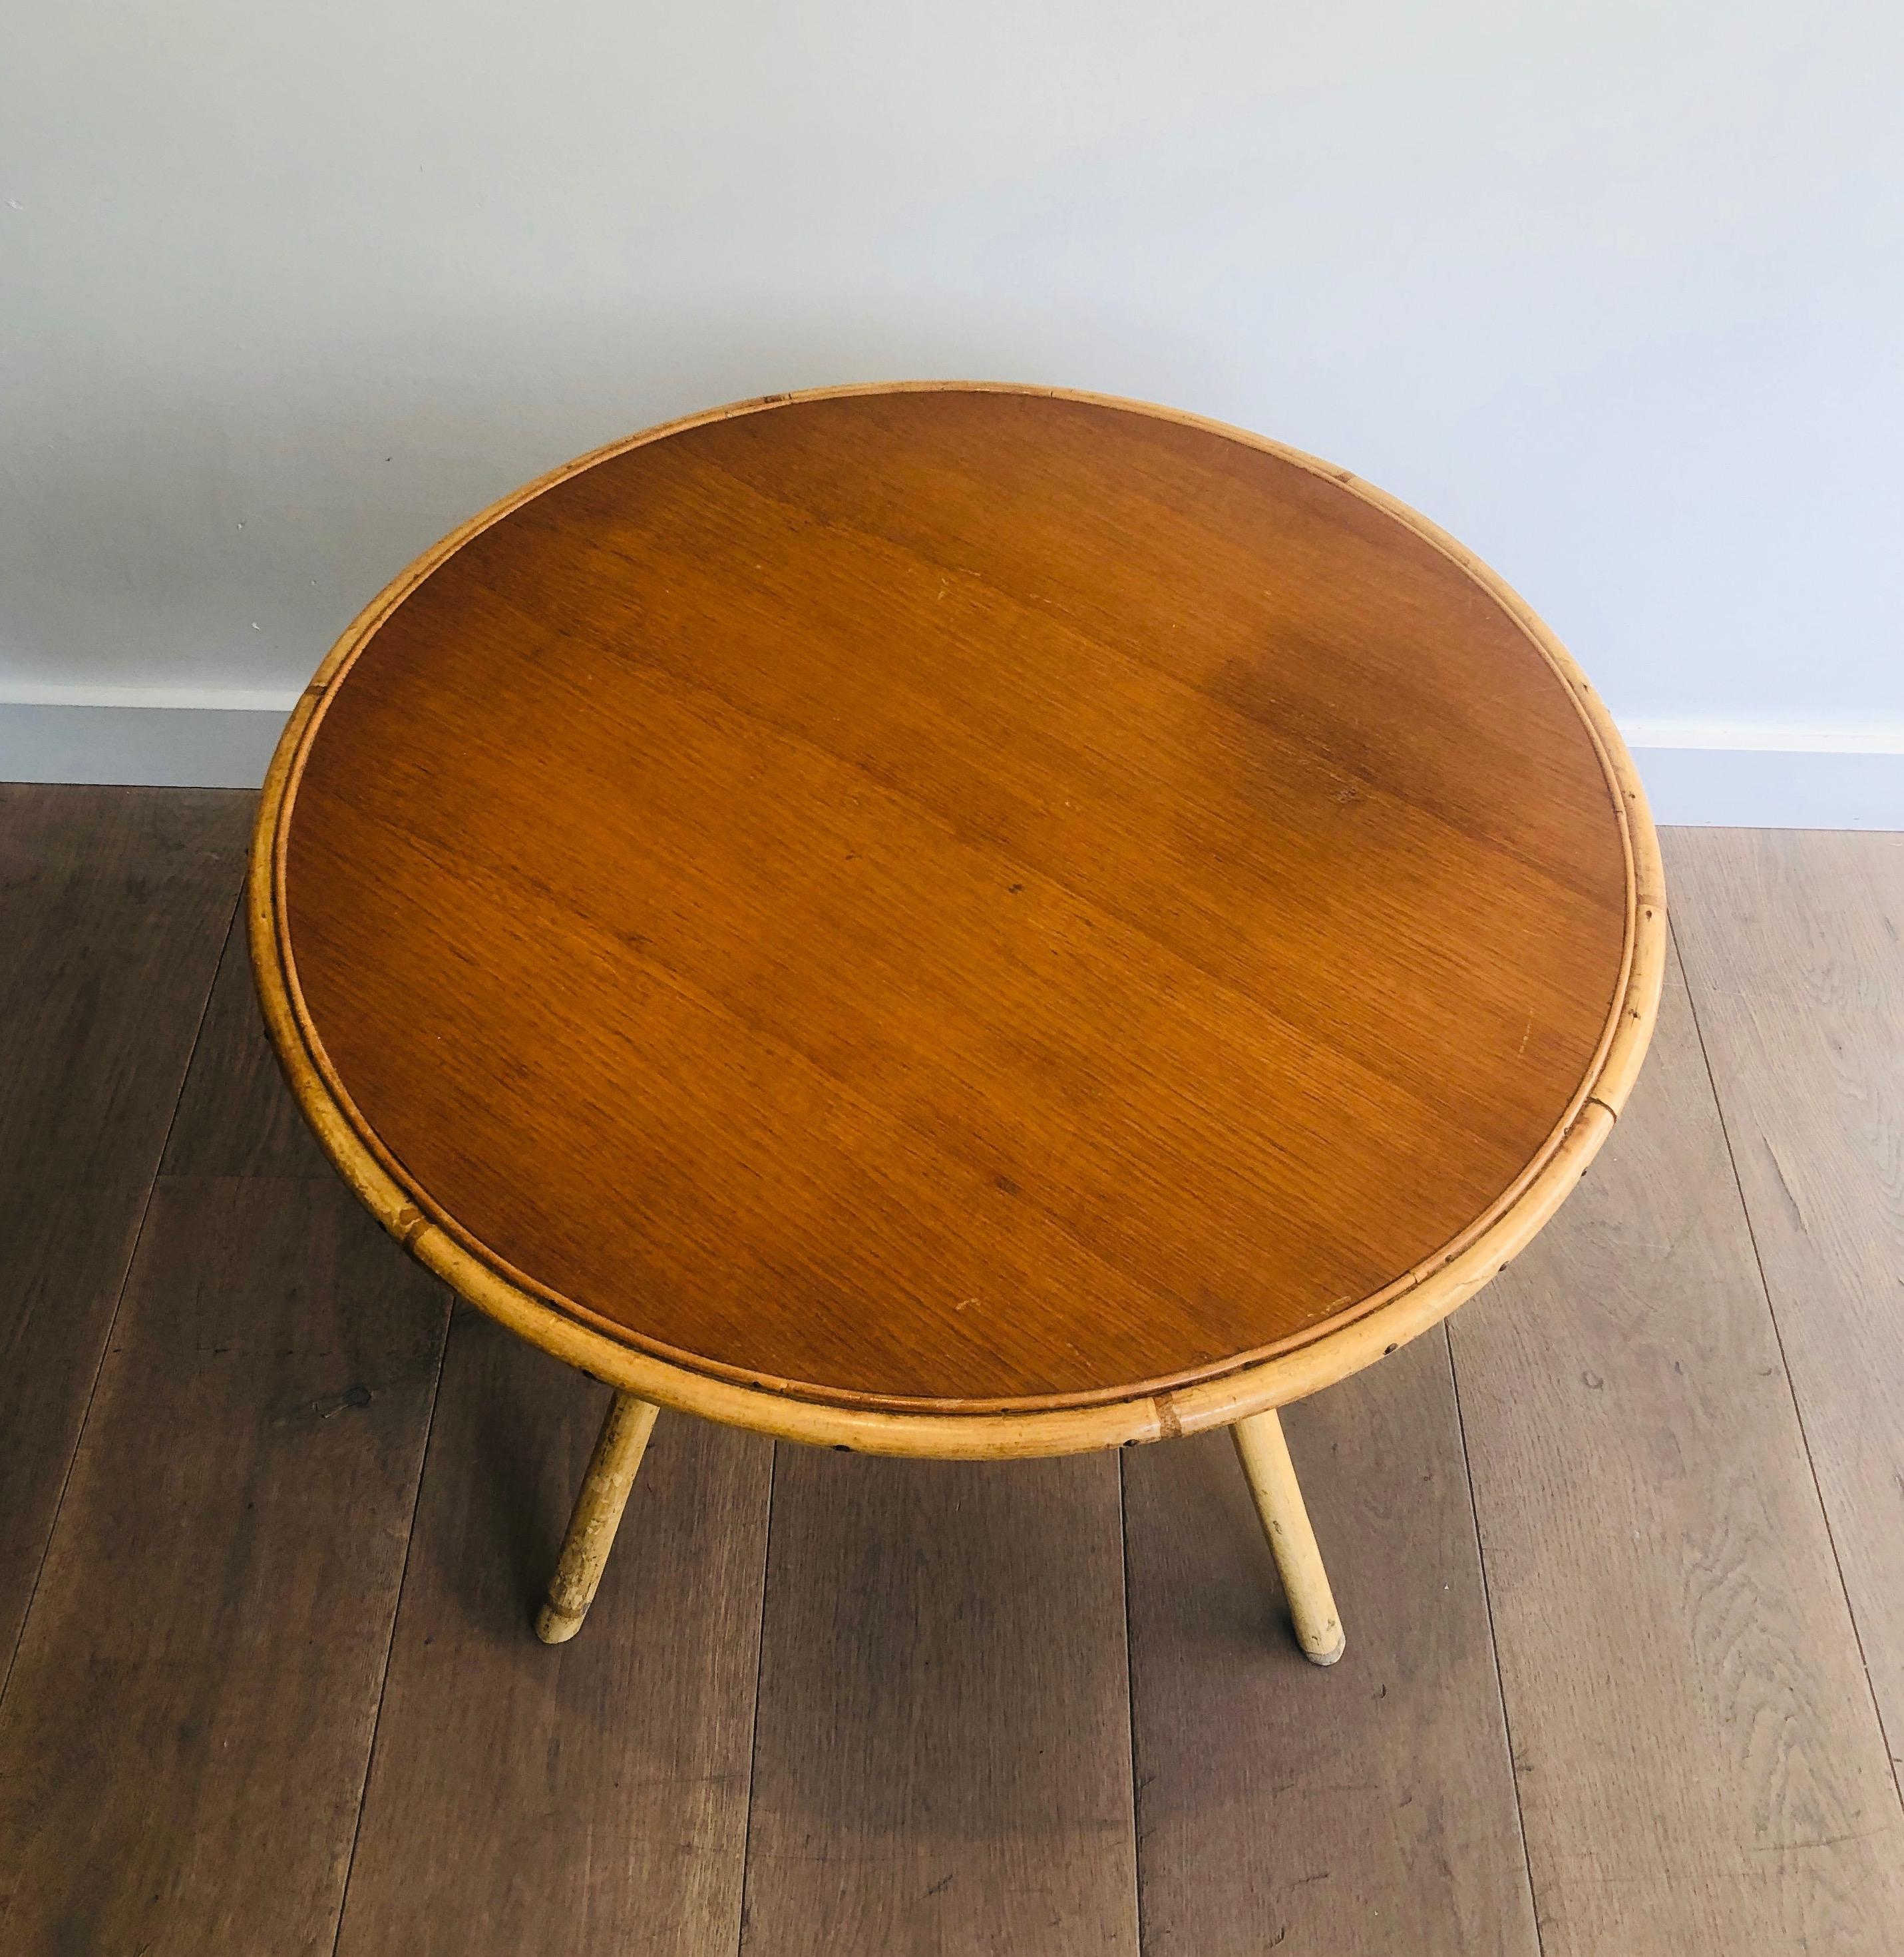 Late 20th Century Small Round Rattan Coffee Table with Wooden Top, French, circa 1970